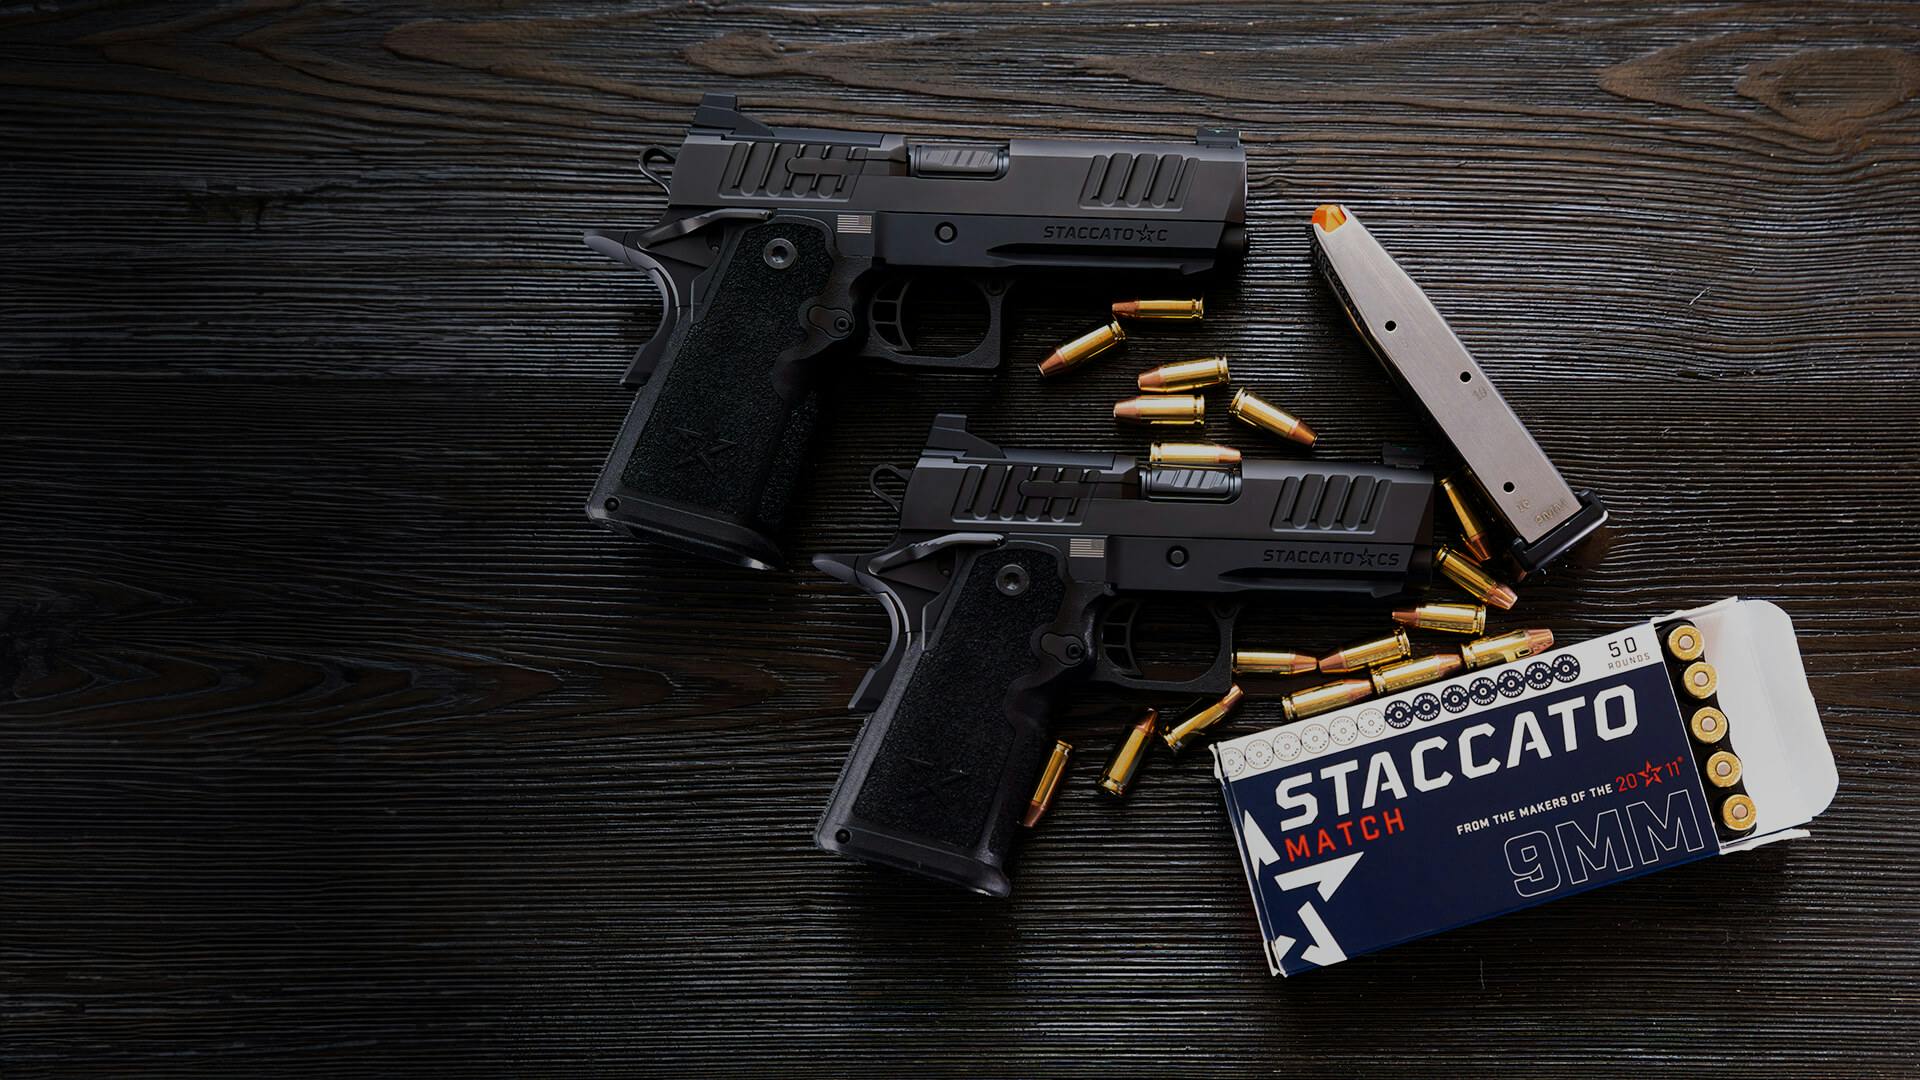 For Built Staccato Heroes. Pistols, - 2011 Accessories. Handguns, 2011 & Staccato